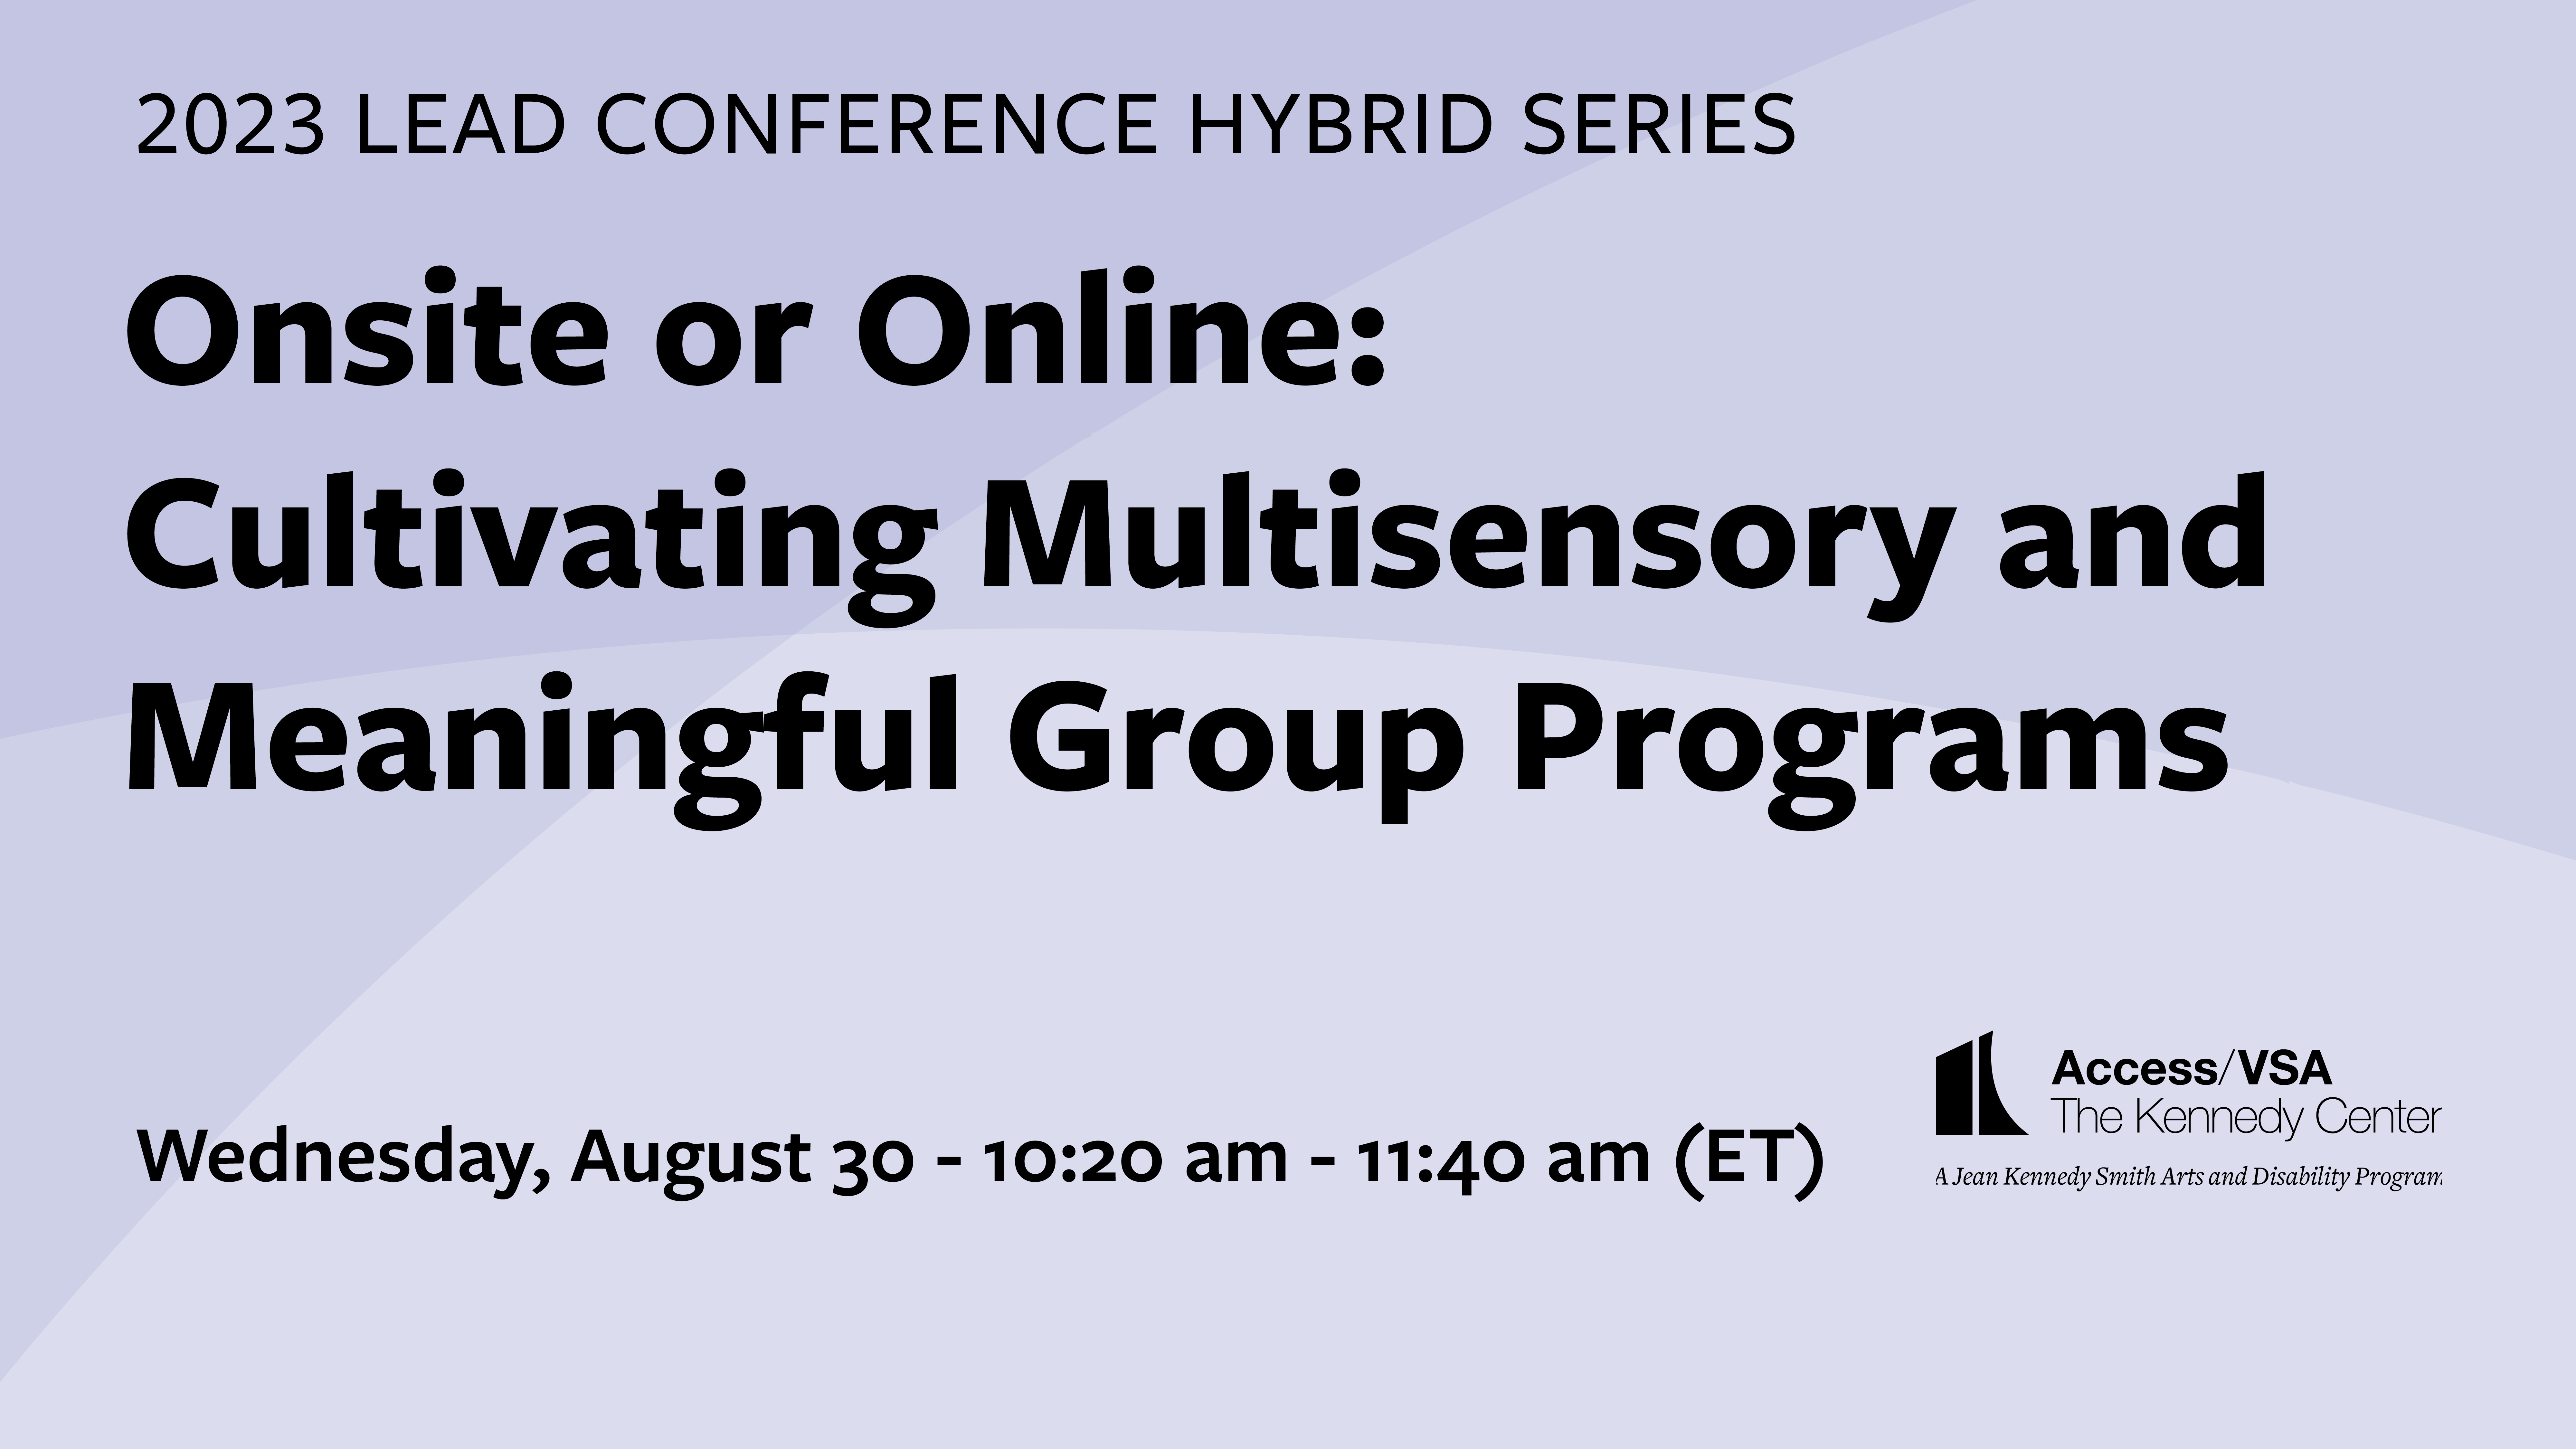 Onsite or Online: Cultivating Multisensory and Meaningful Group Programs 